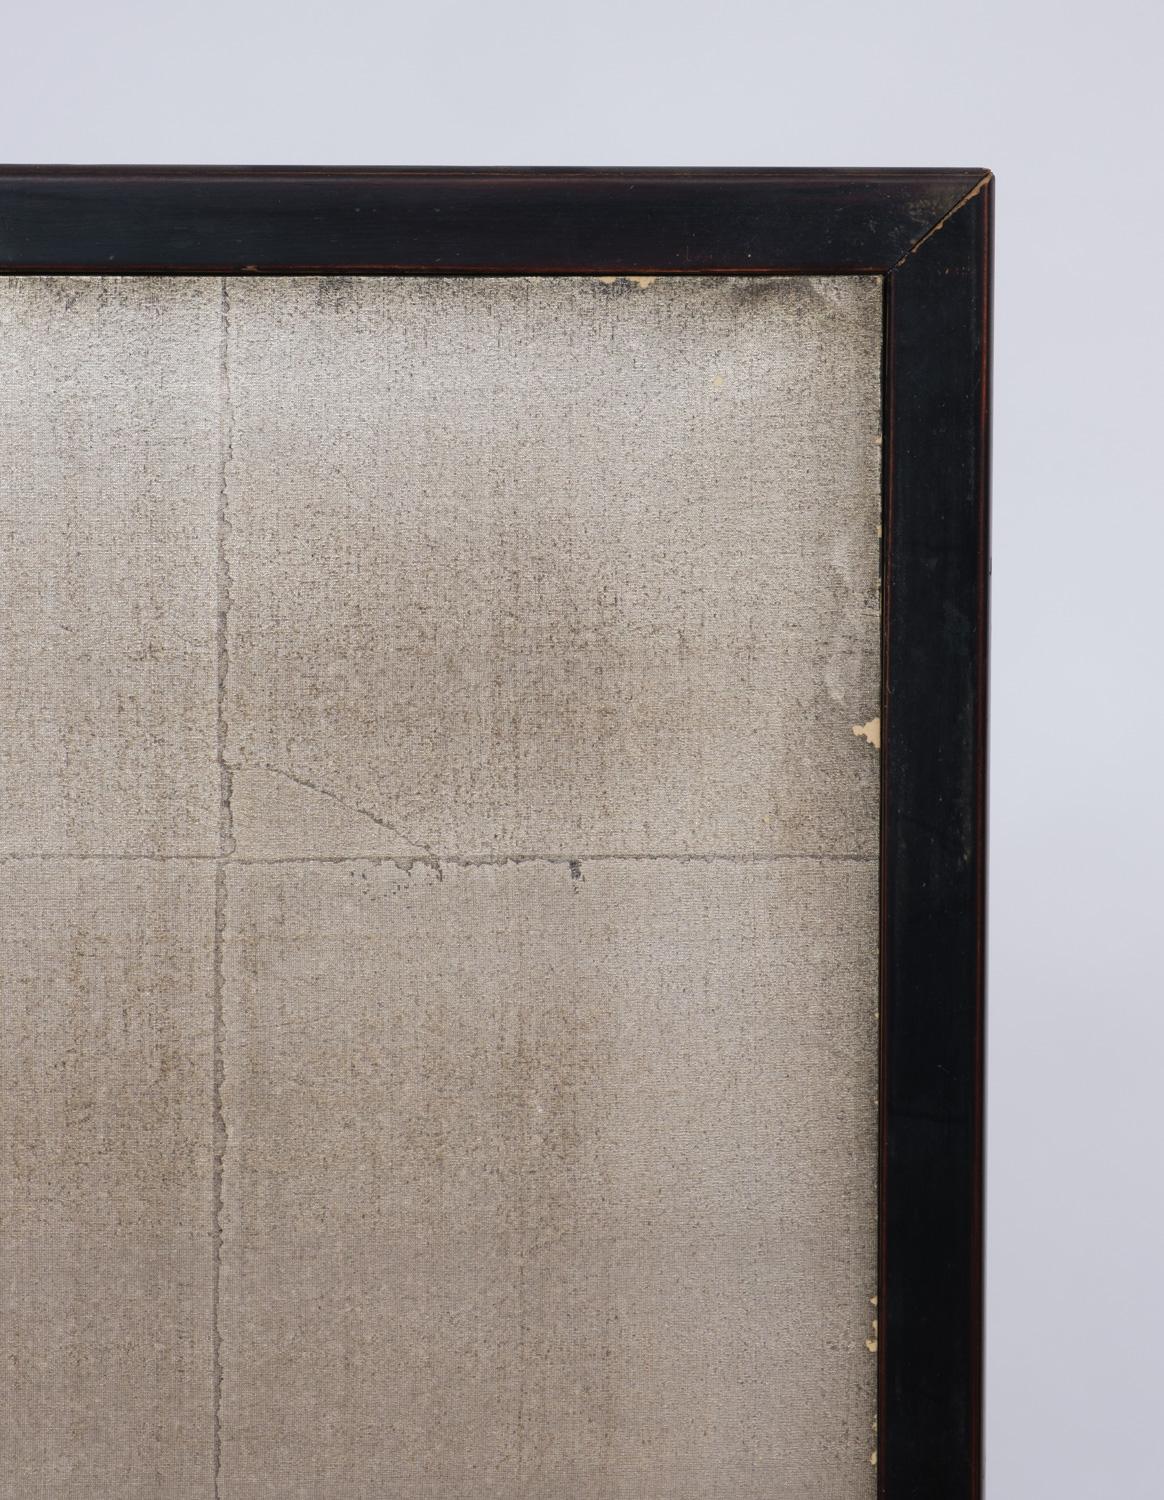 Large Japanese 2-Panel Byôbu 屏風 'Room Divider' with Painting of Bamboo & a Poem For Sale 2